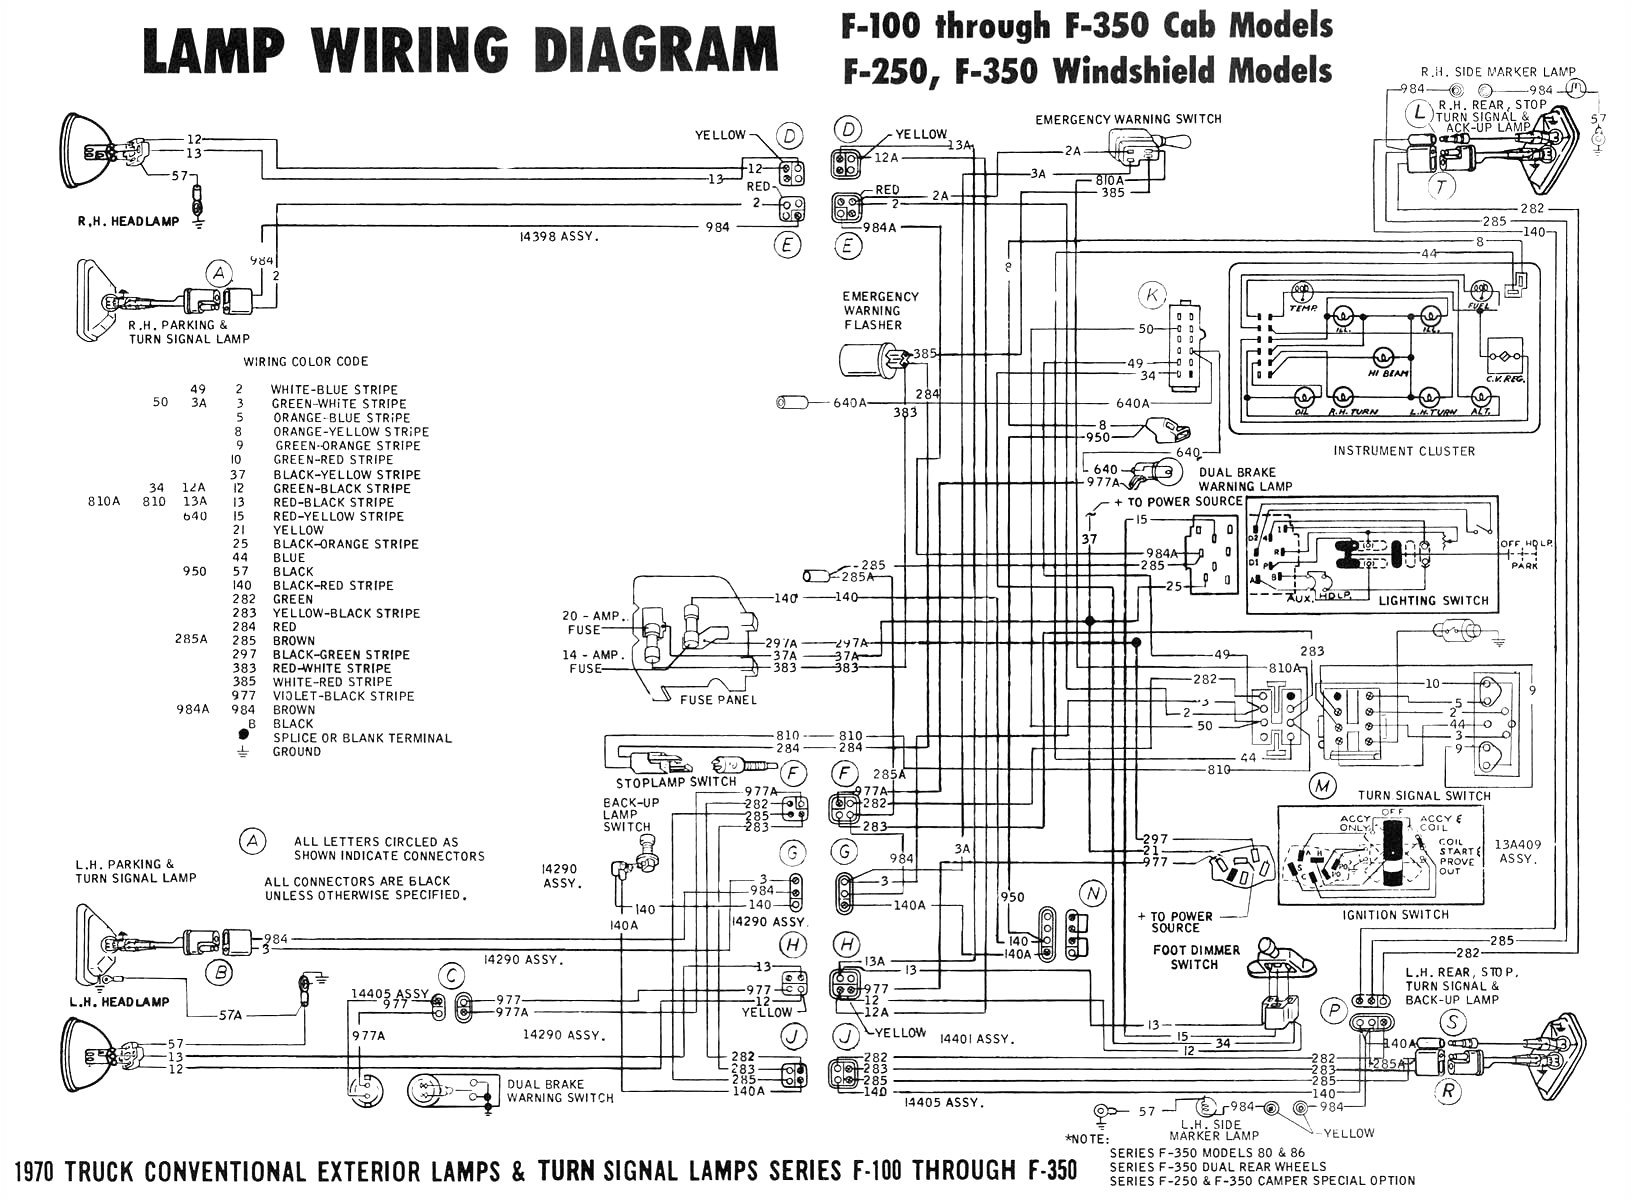 fuse box diagram likewise 2003 chevy impala wiring on astra h wiring diagram also john deere fuel pump diagram likewise freightliner